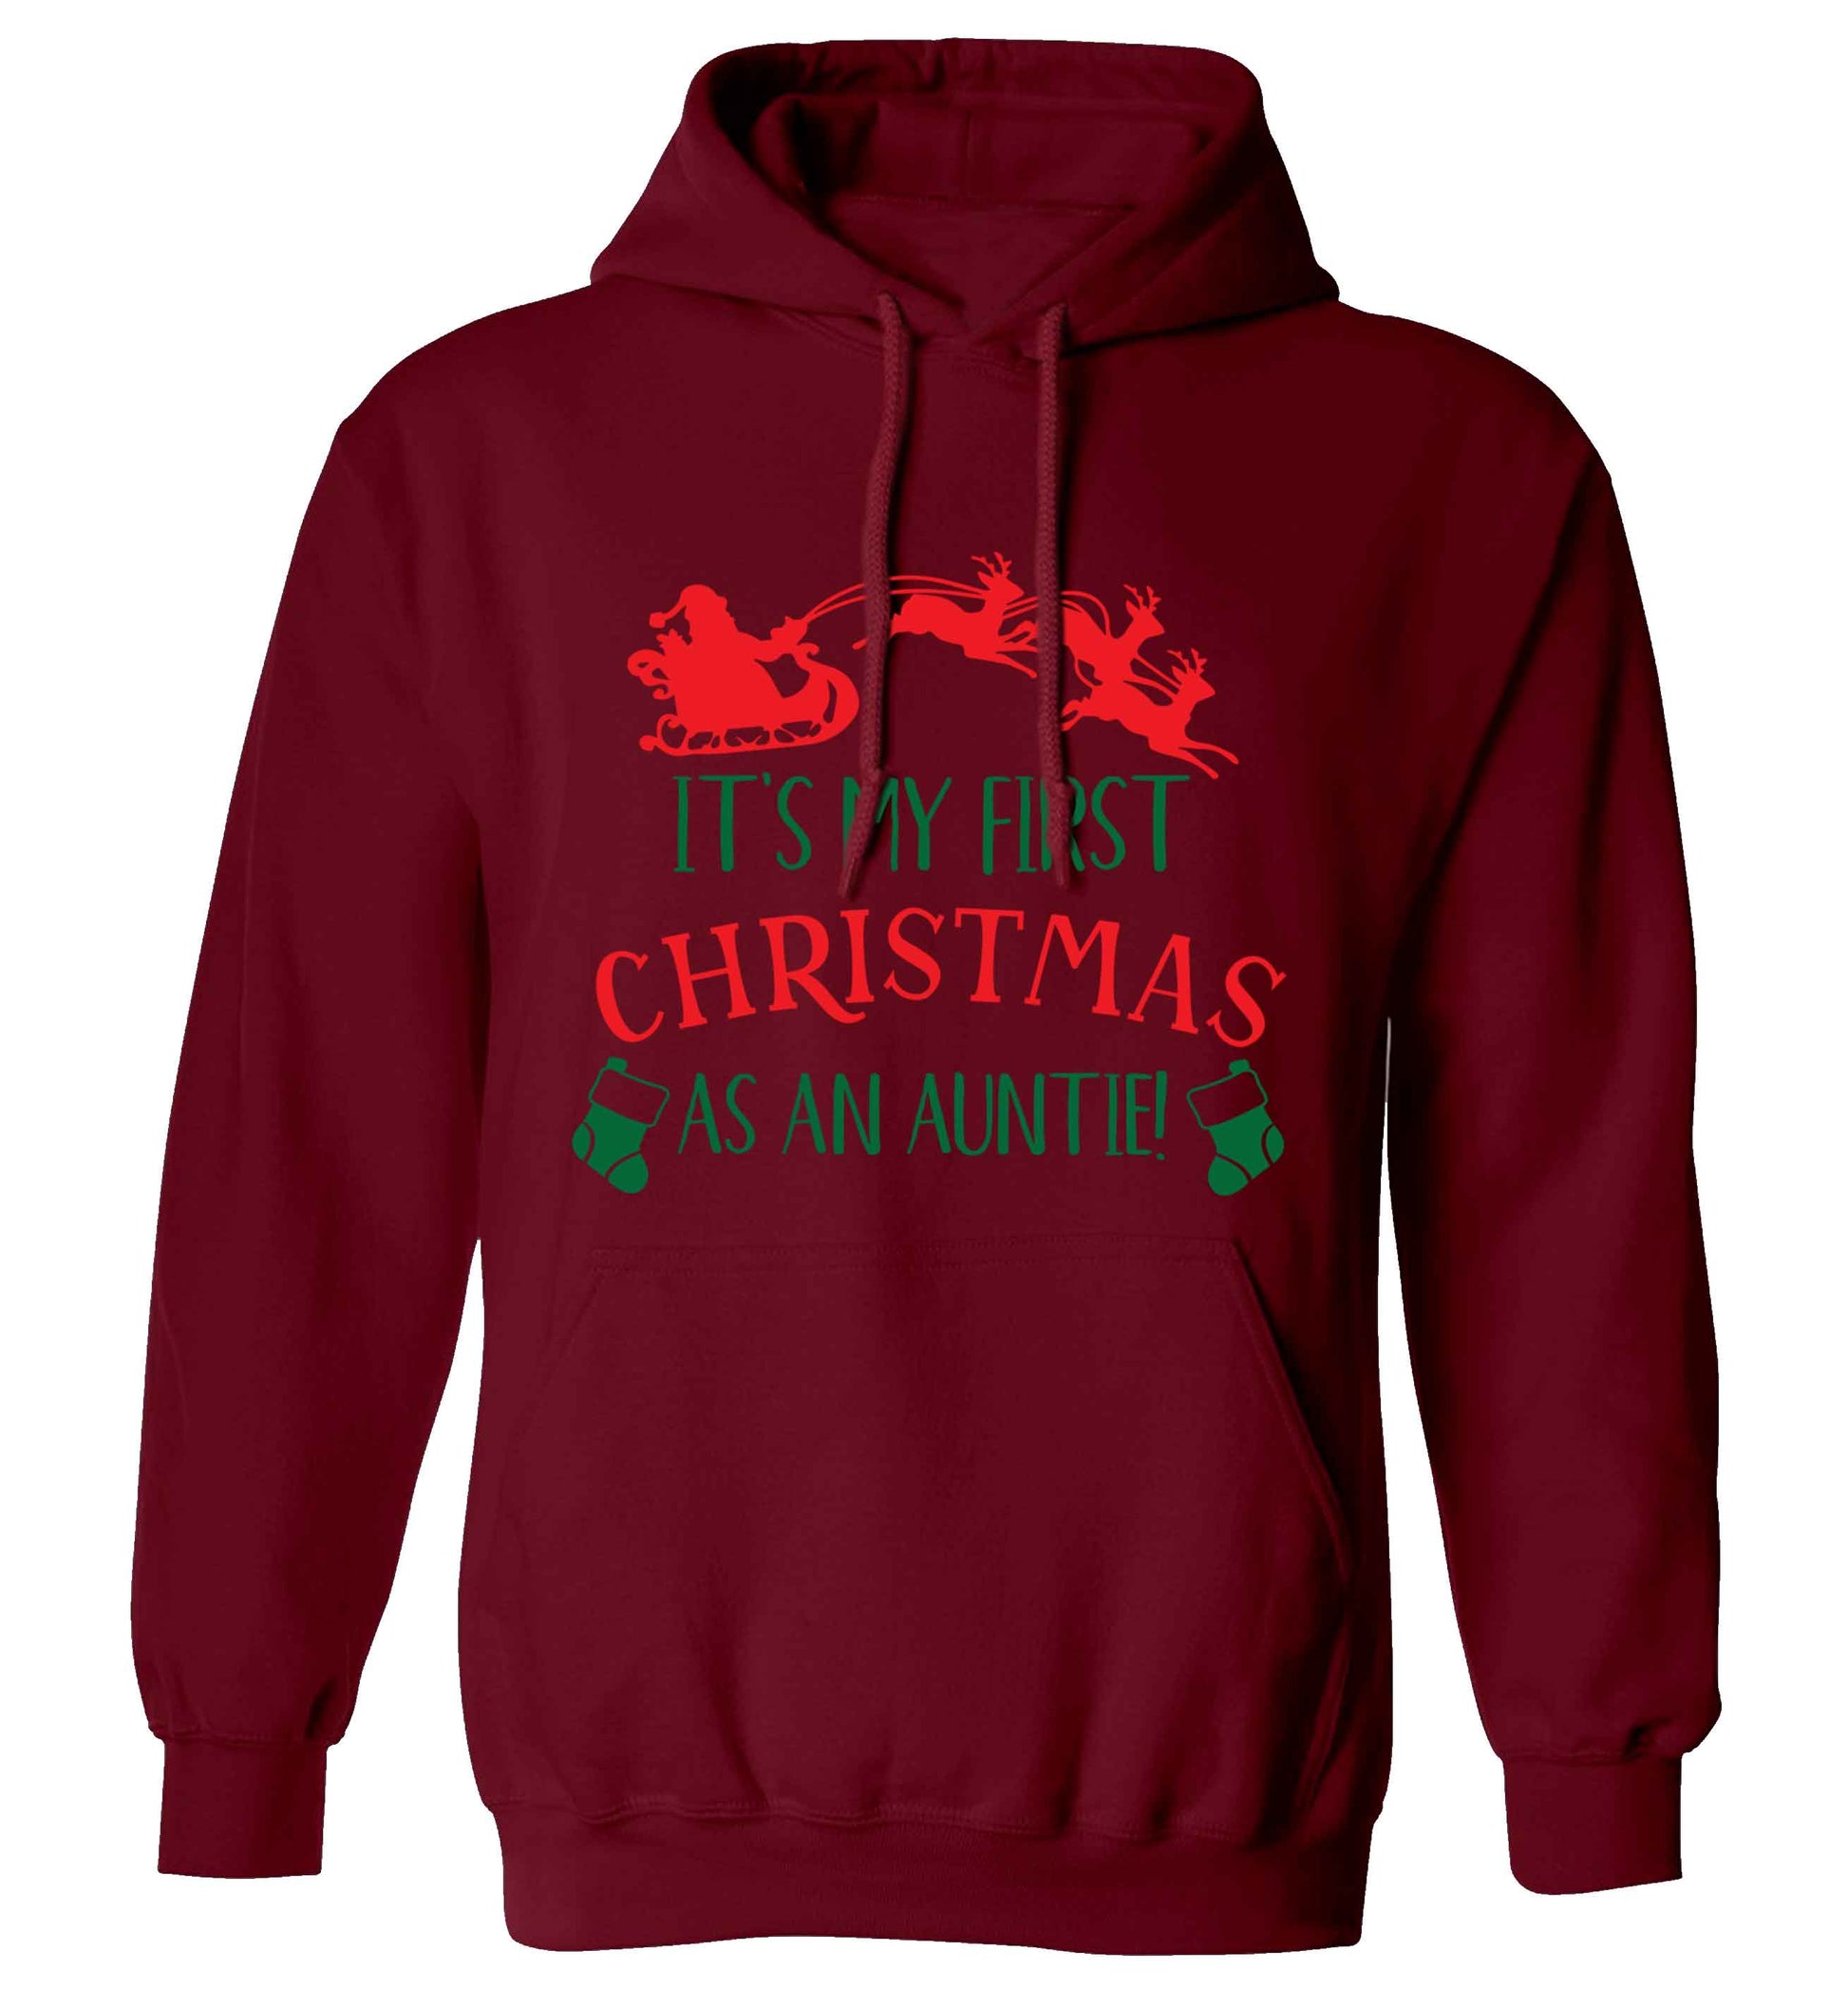 It's my first Christmas as an auntie! adults unisex maroon hoodie 2XL